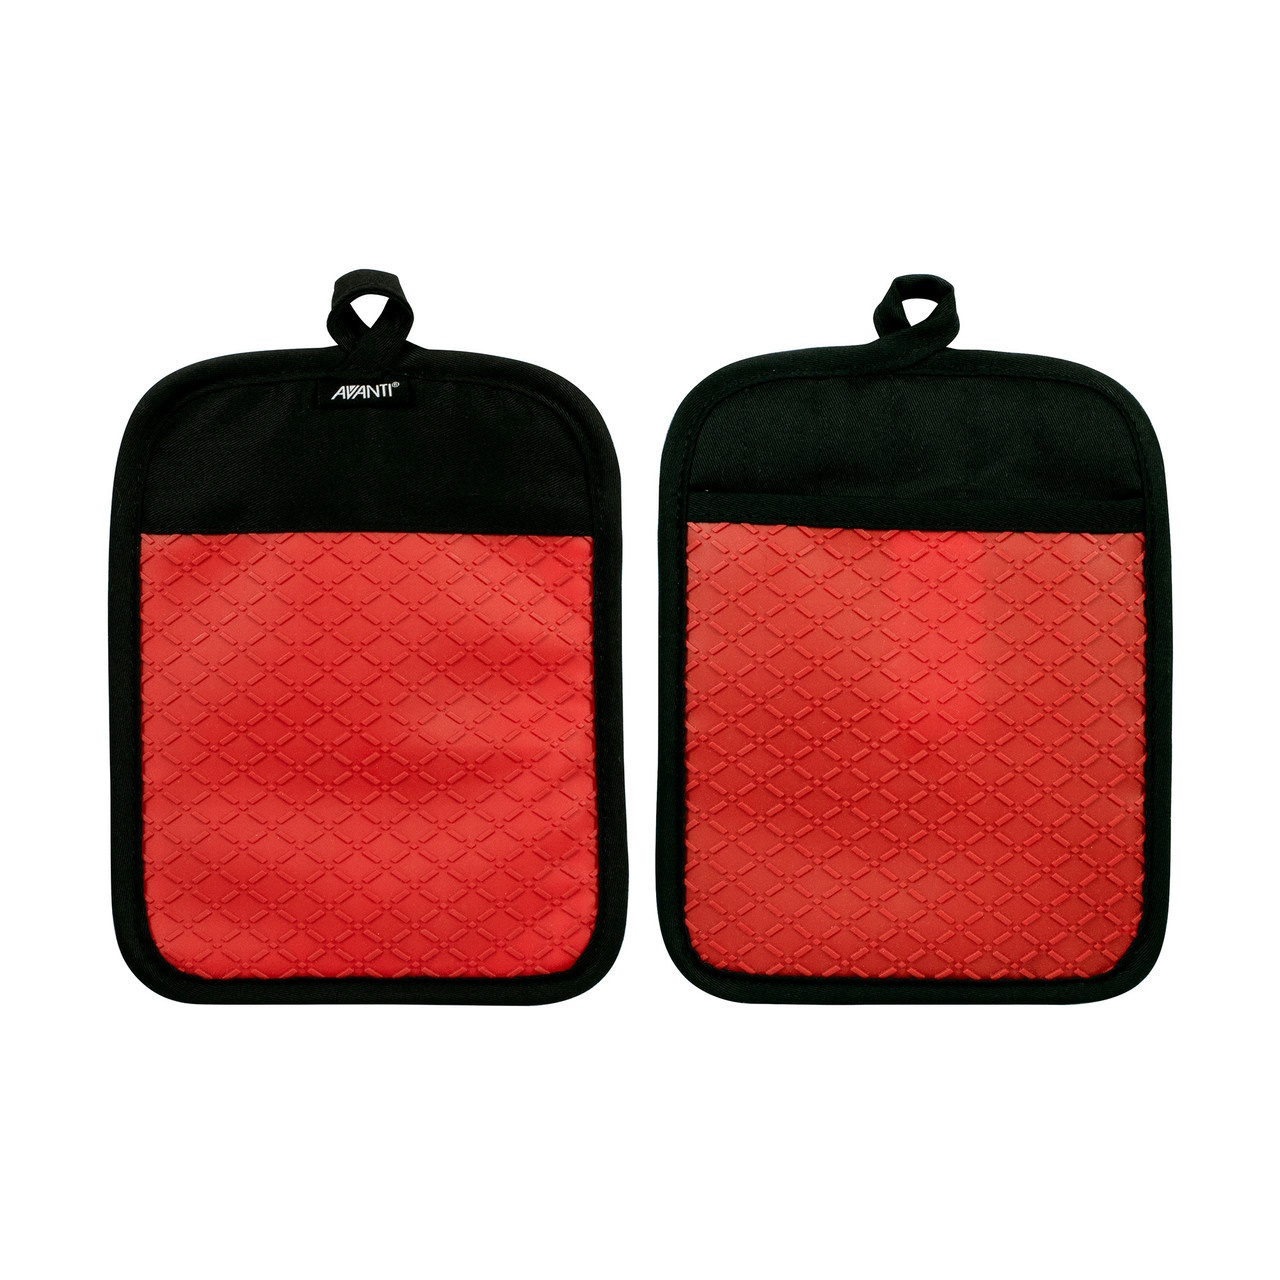 Silicone Pot Holder, Set of 2 - Red